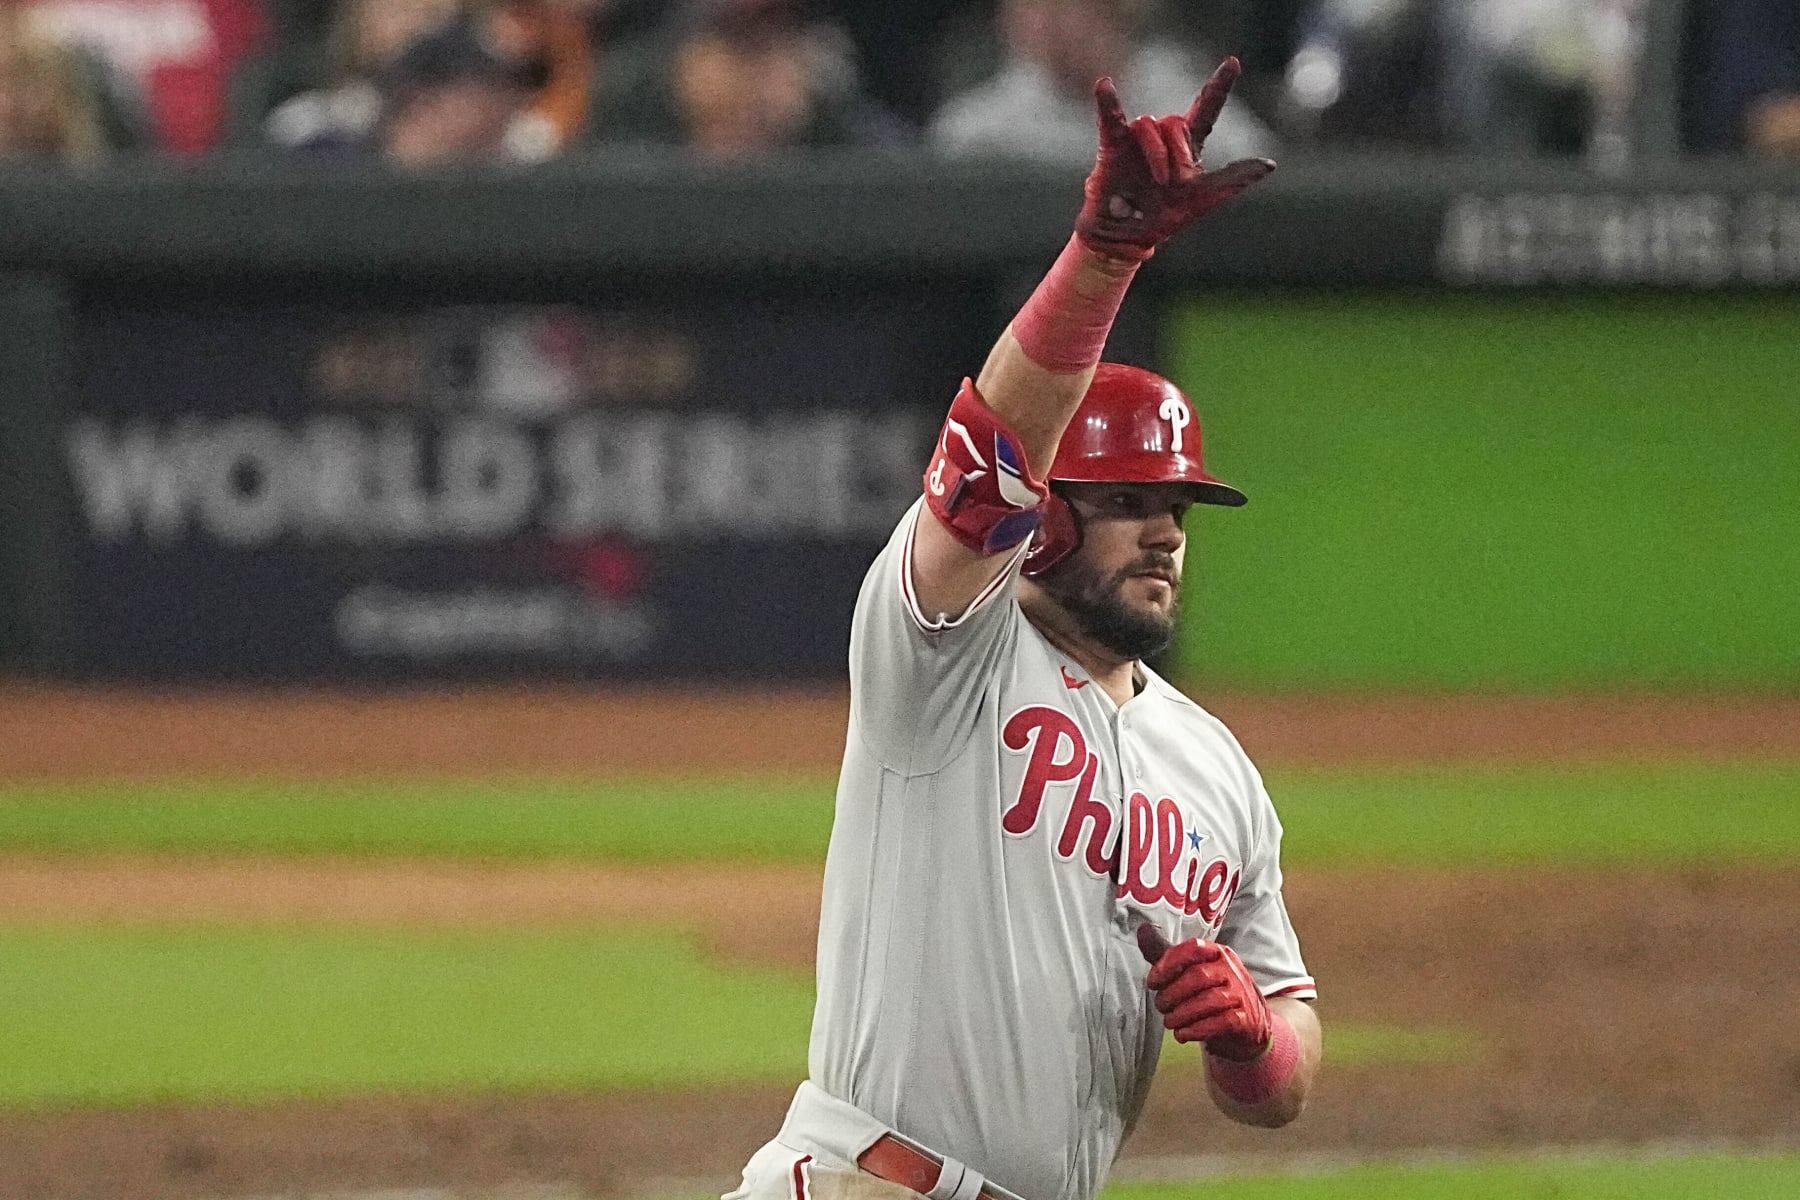 Phillies Focus On Future After Losing World Series - The New York